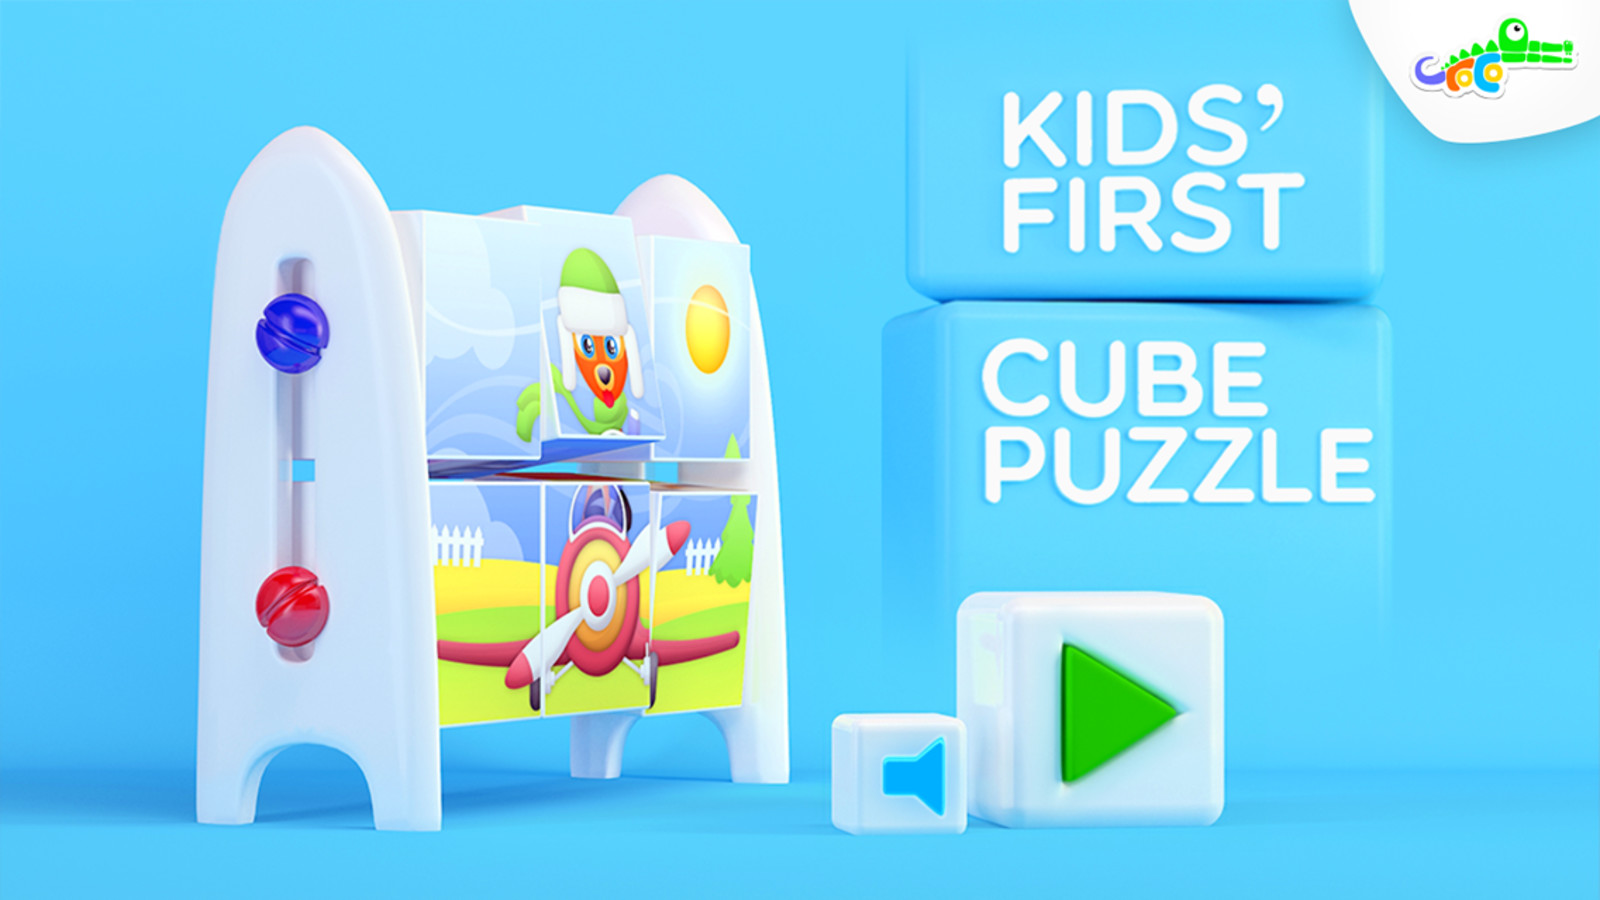 Kids’ First Cube Puzzle